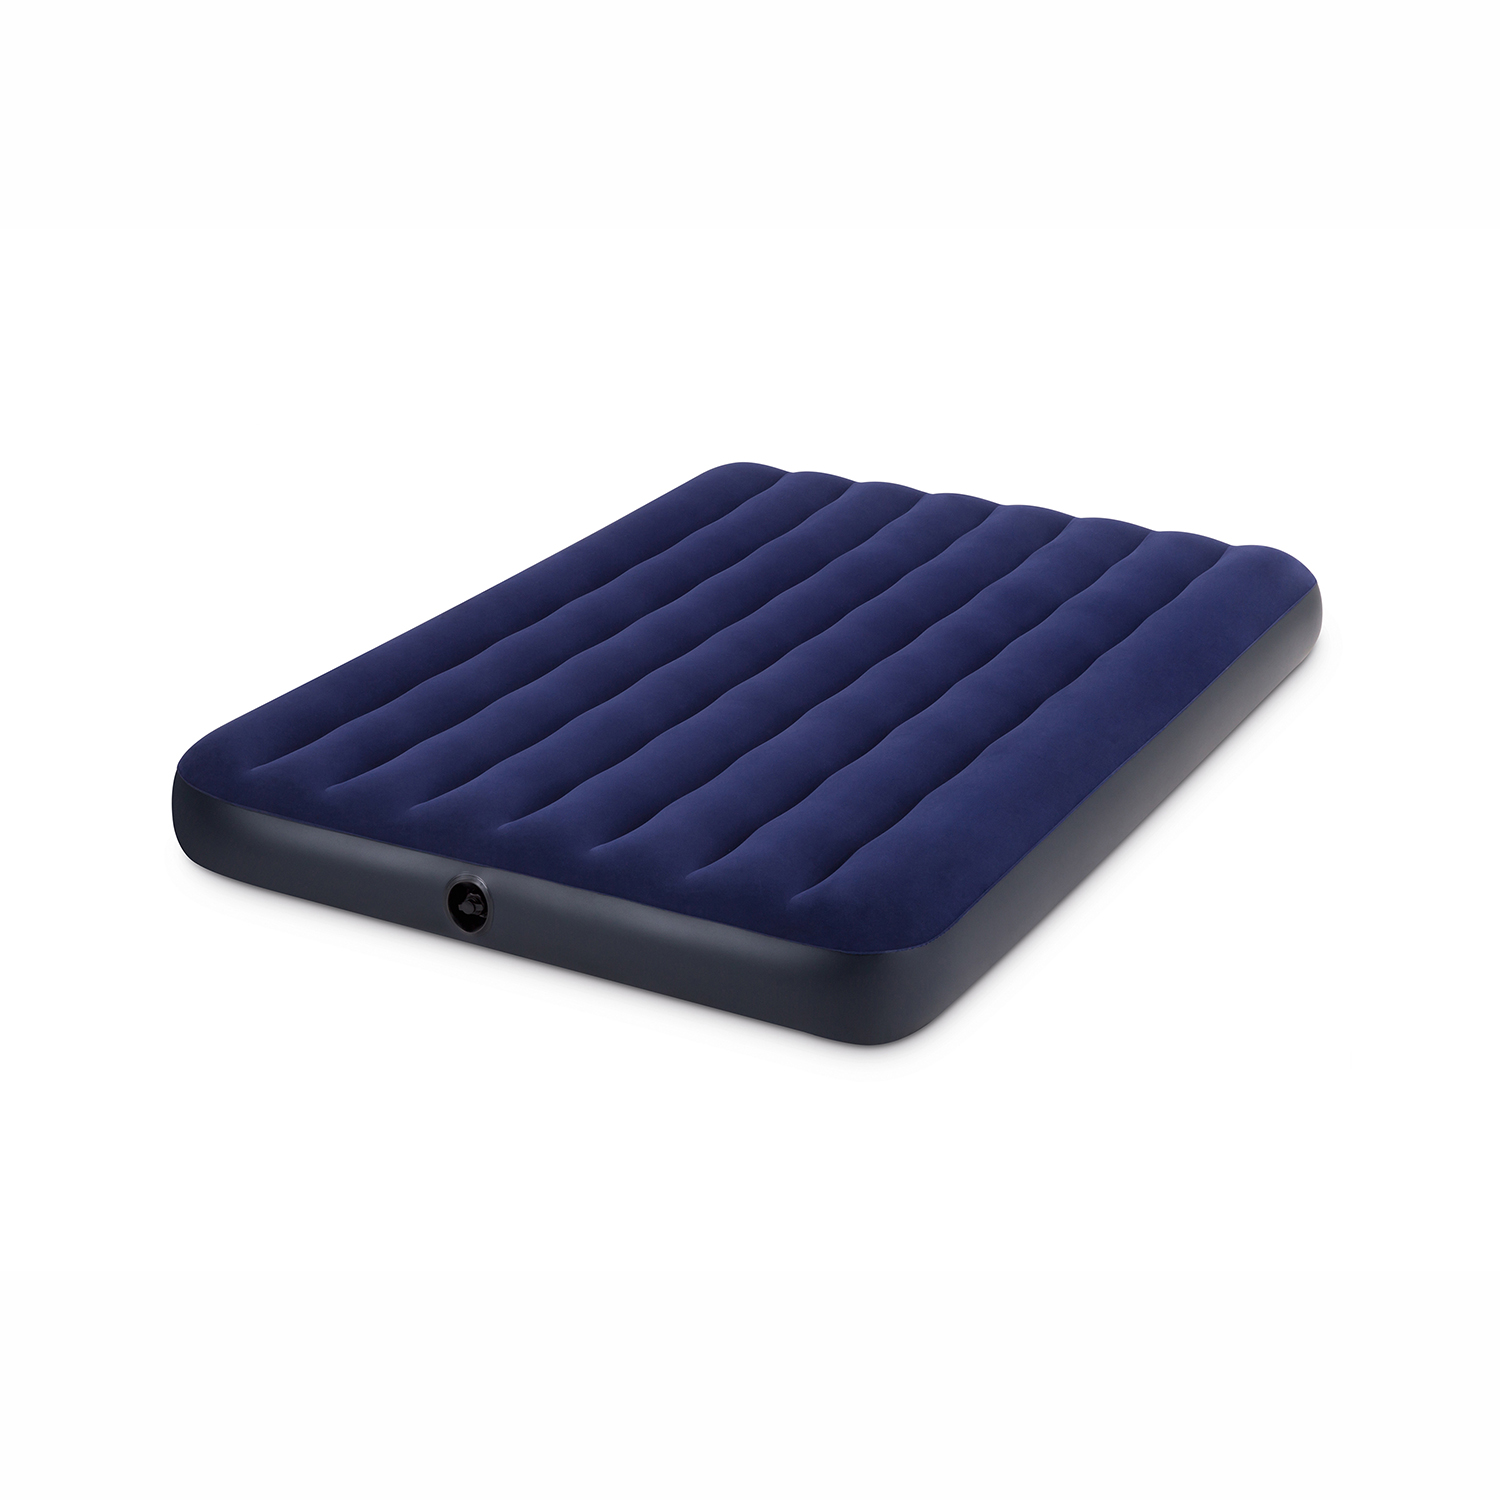 Intex Full 8.75" Classic Downy Inflatable Airbed Mattress - image 1 of 6